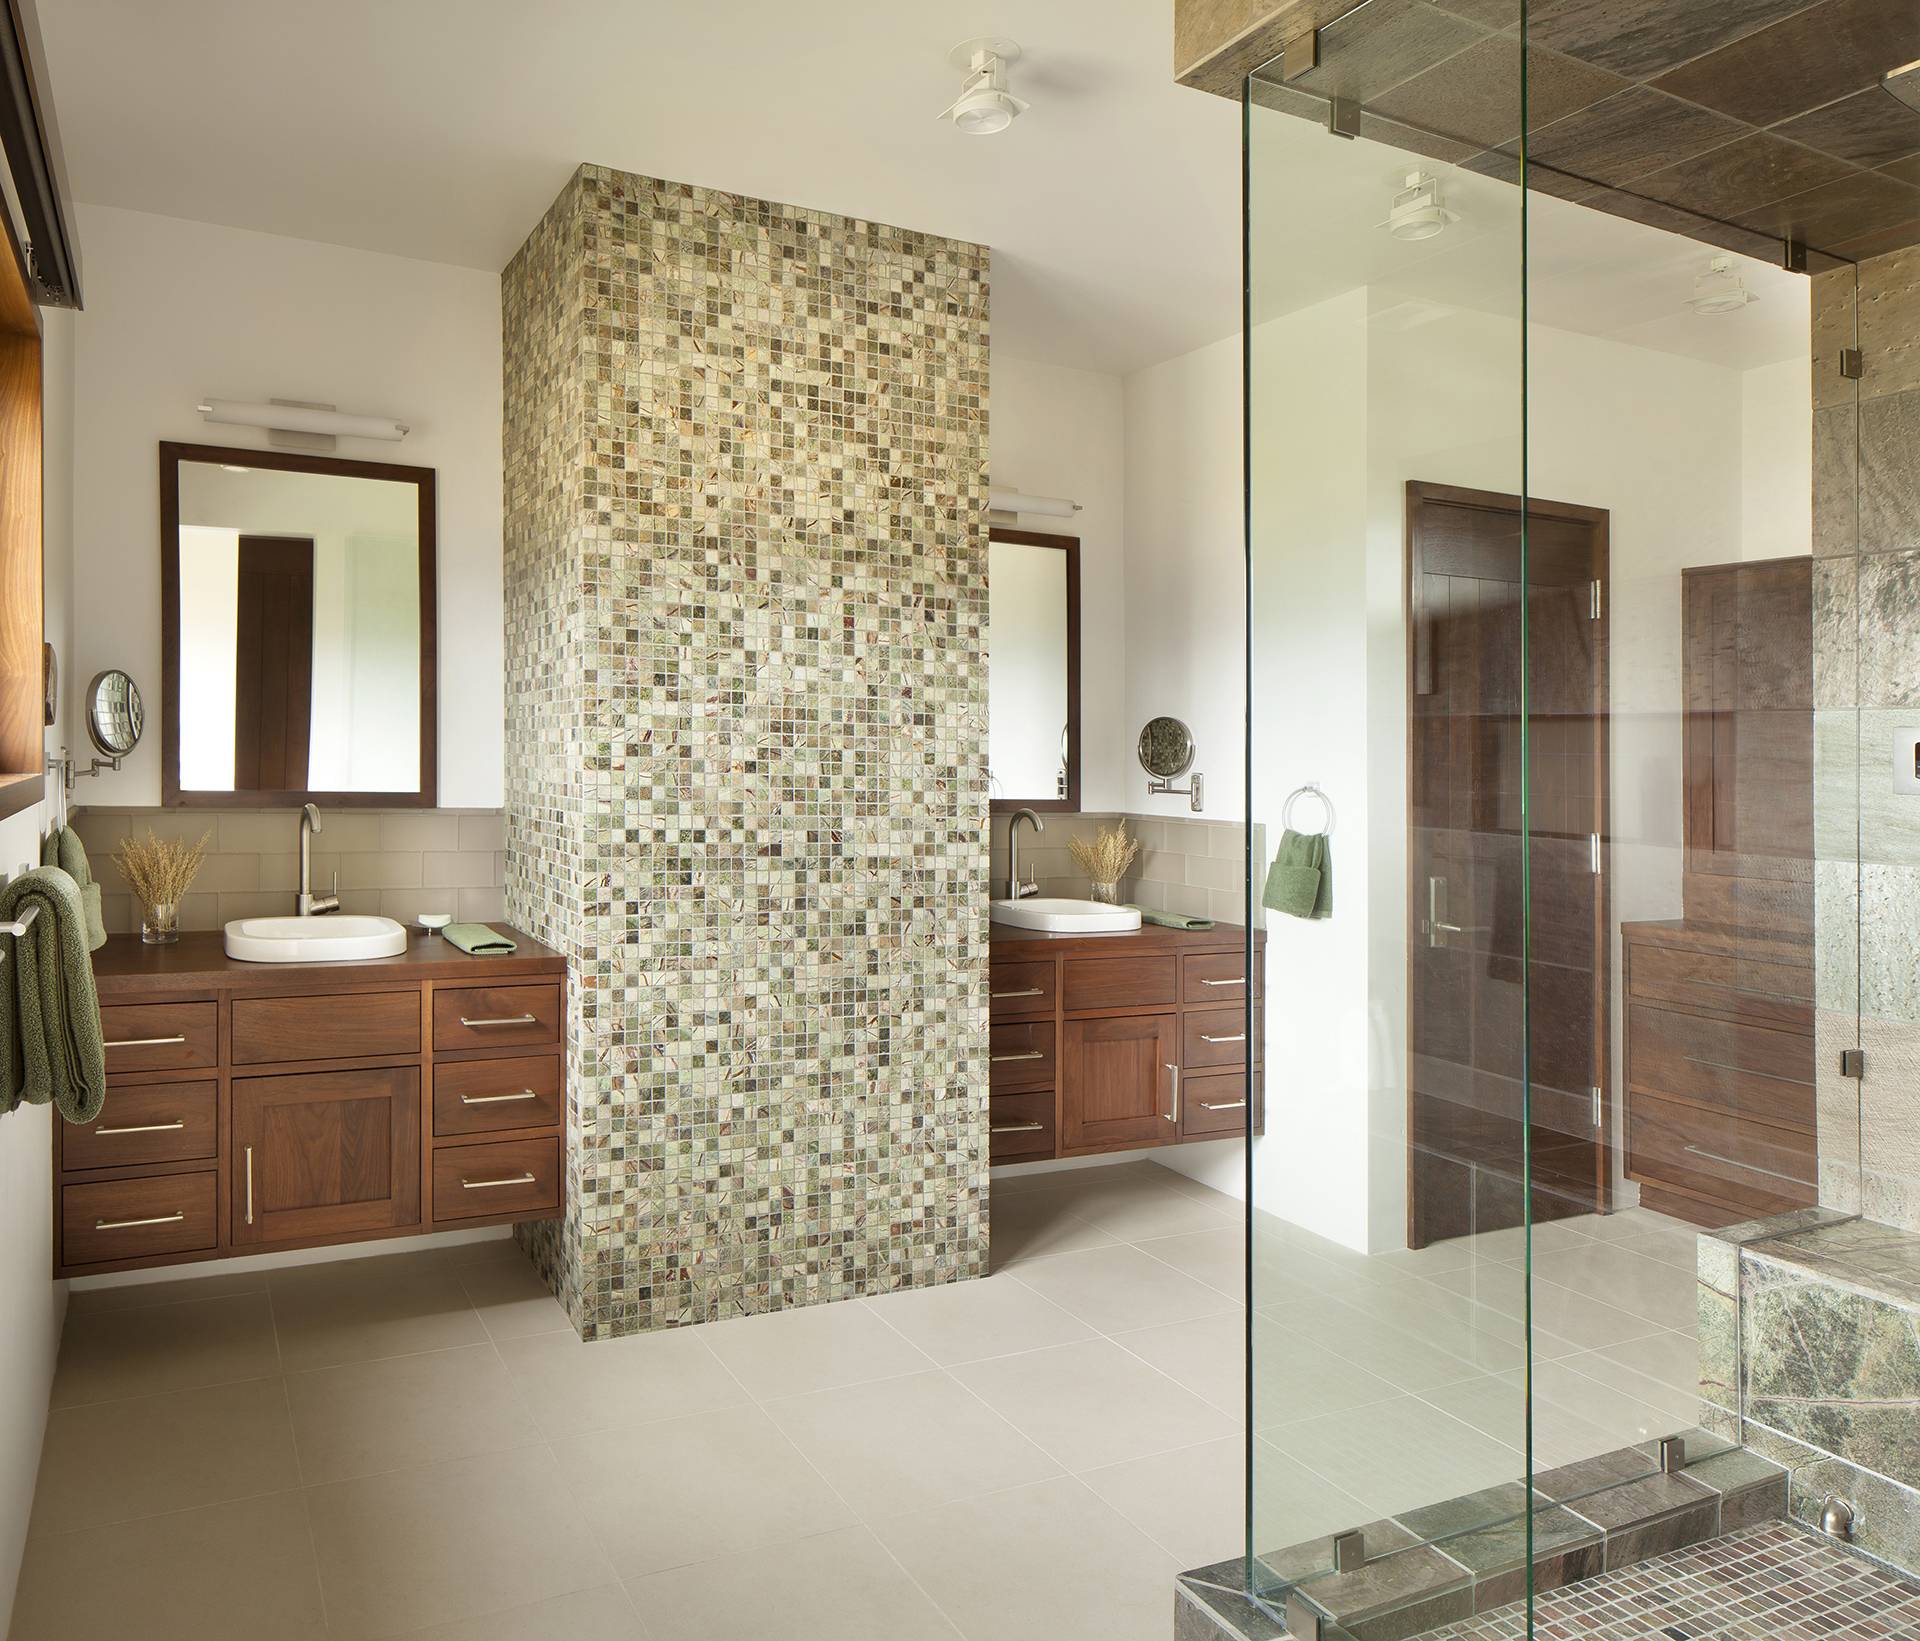 double vanity master bathroom with stone accent wall separating sinks